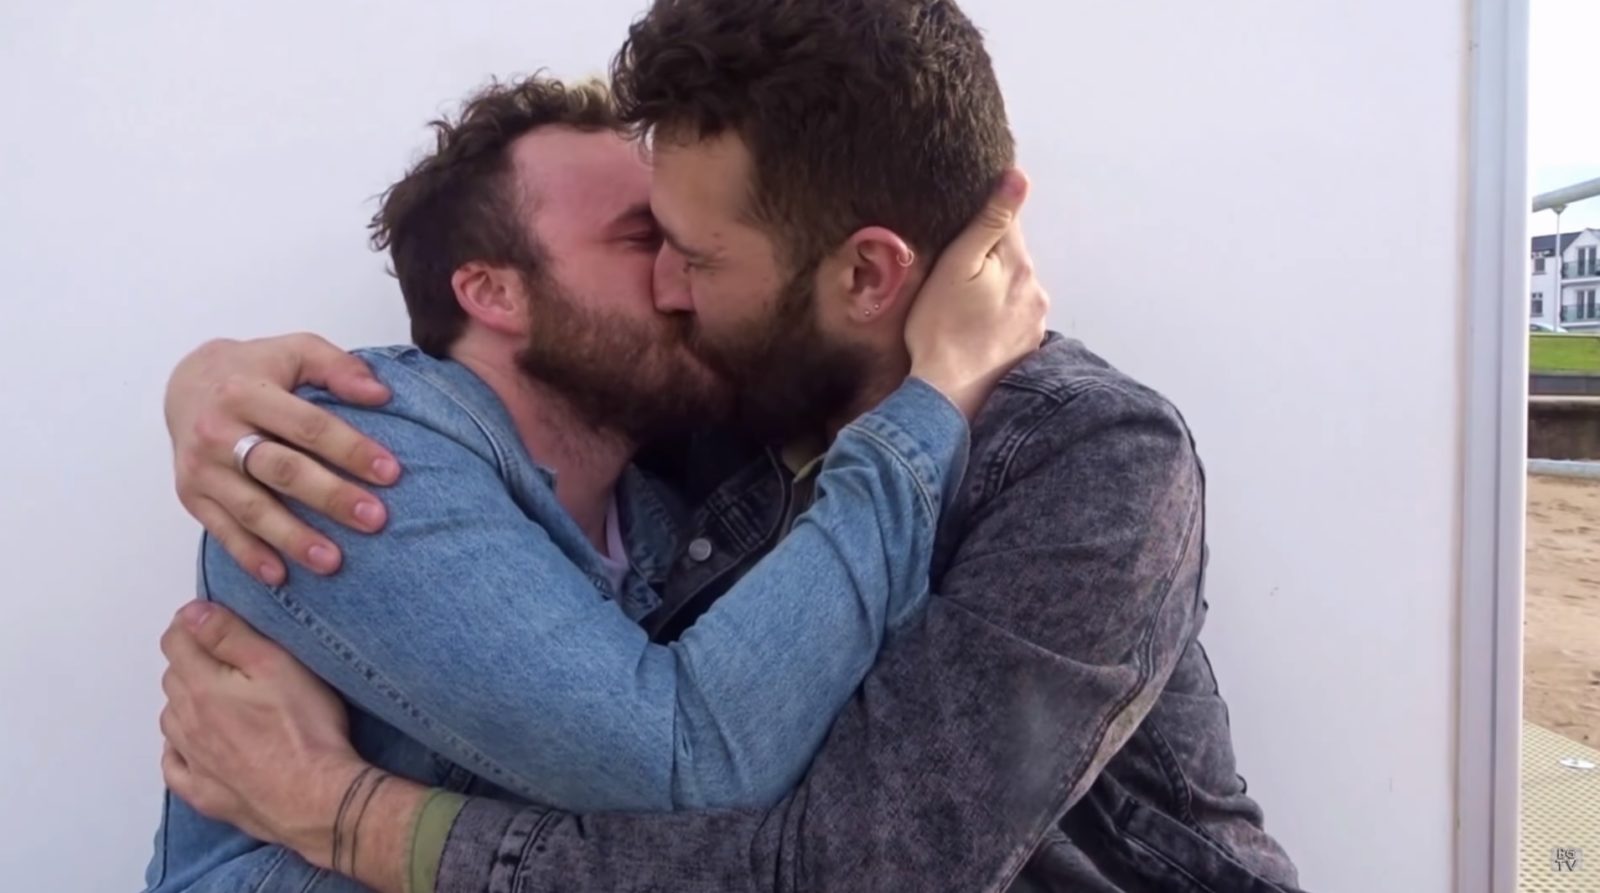 Mum's heartbreaking letter to gay son